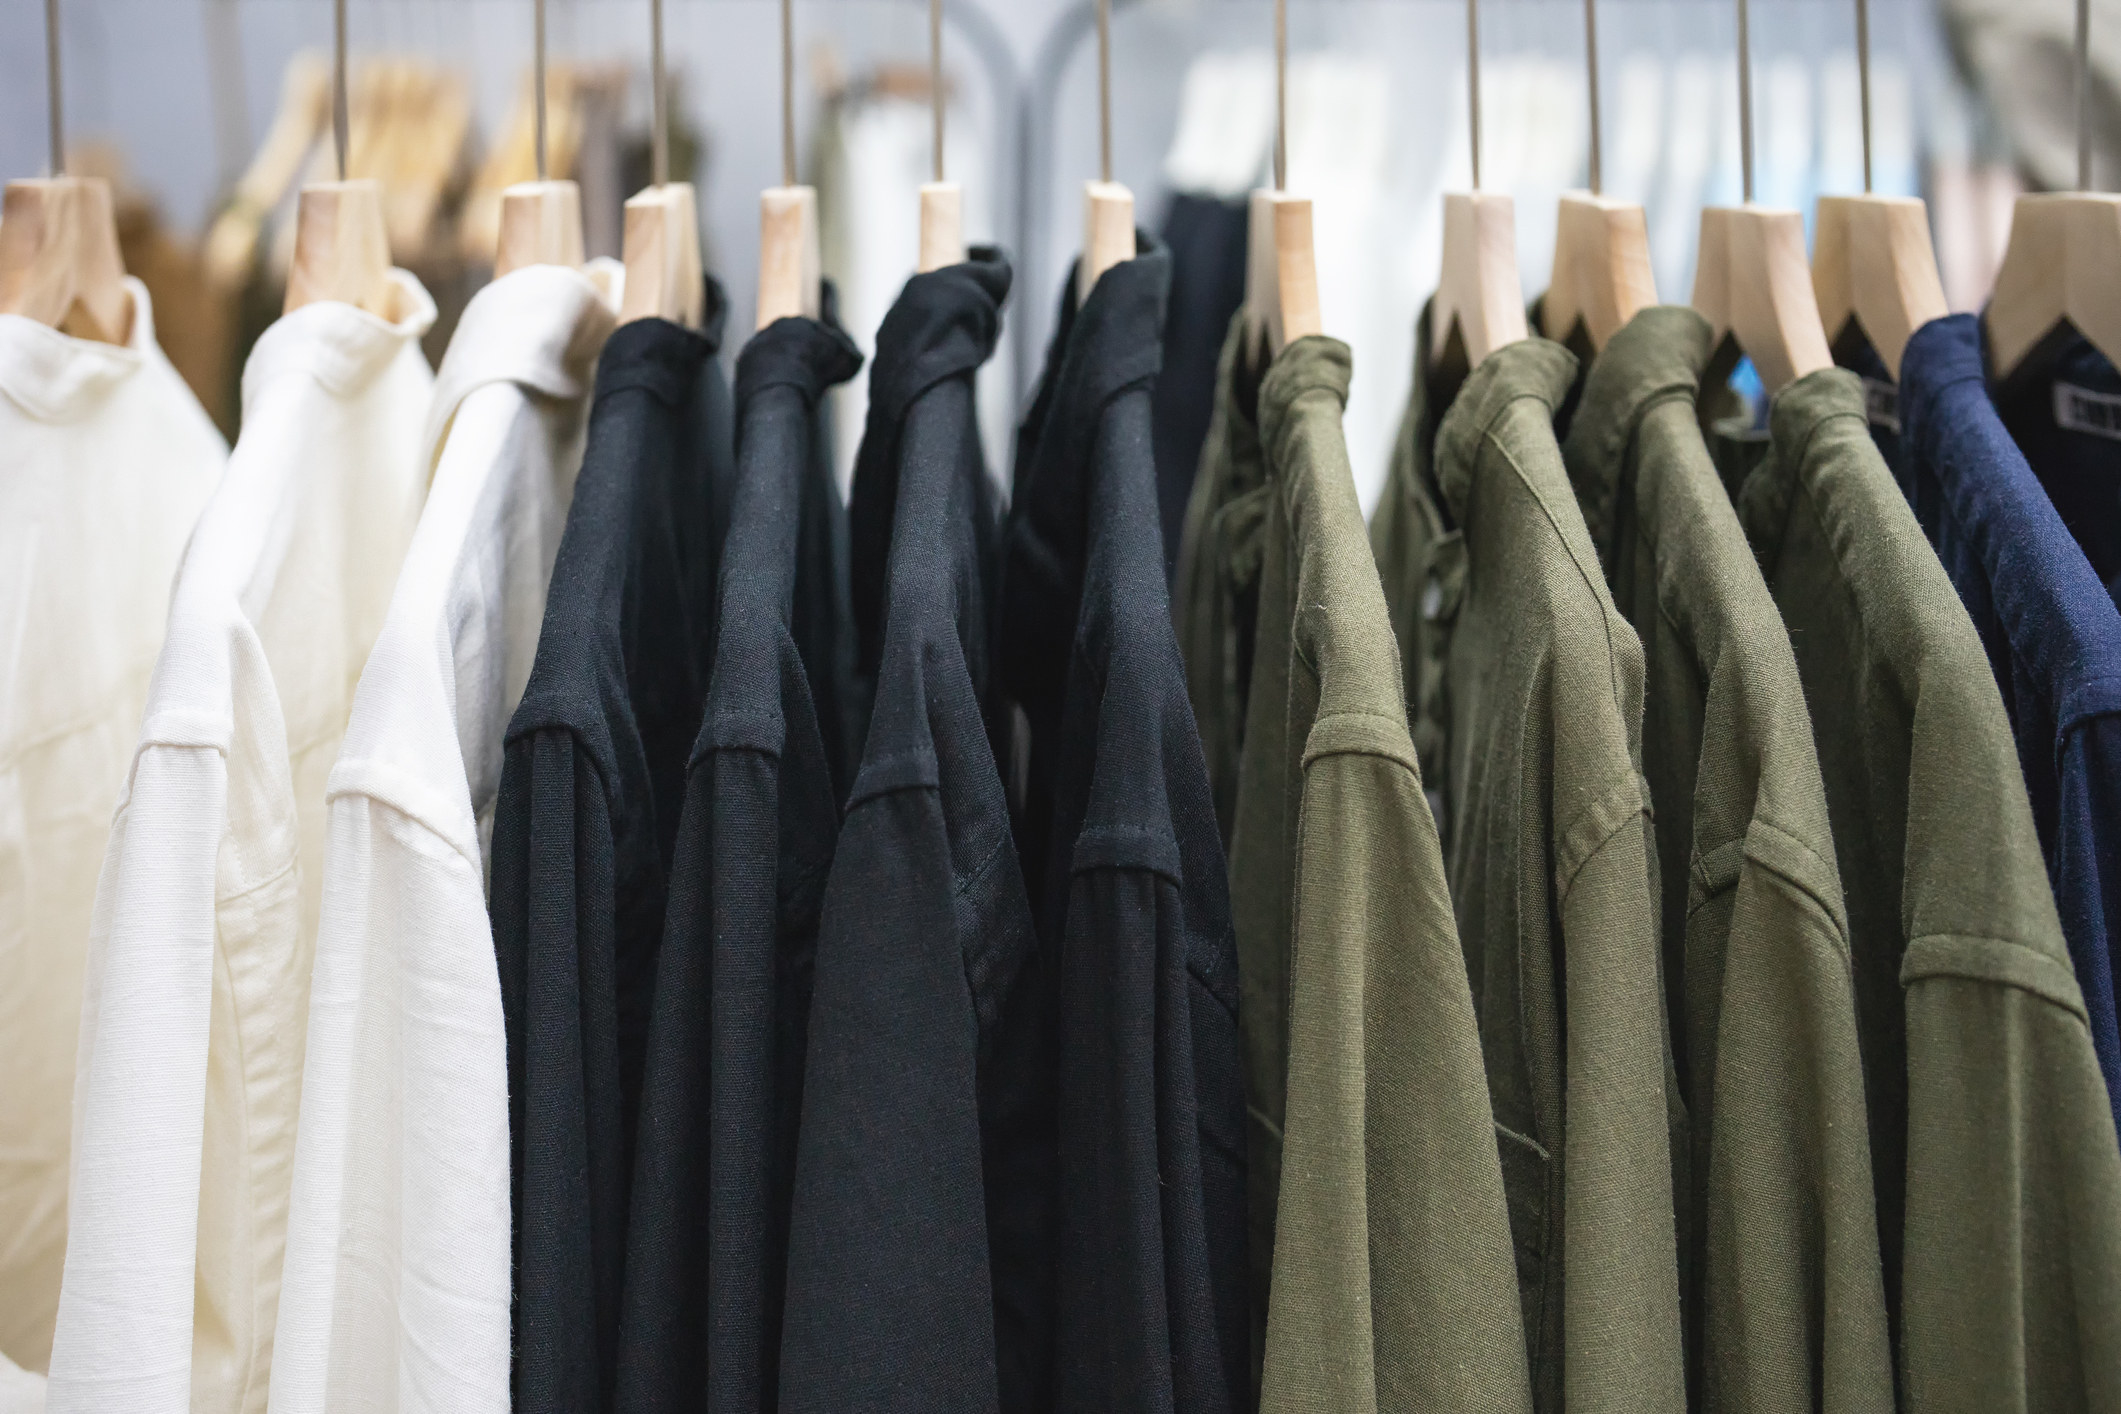 A rack of clothes